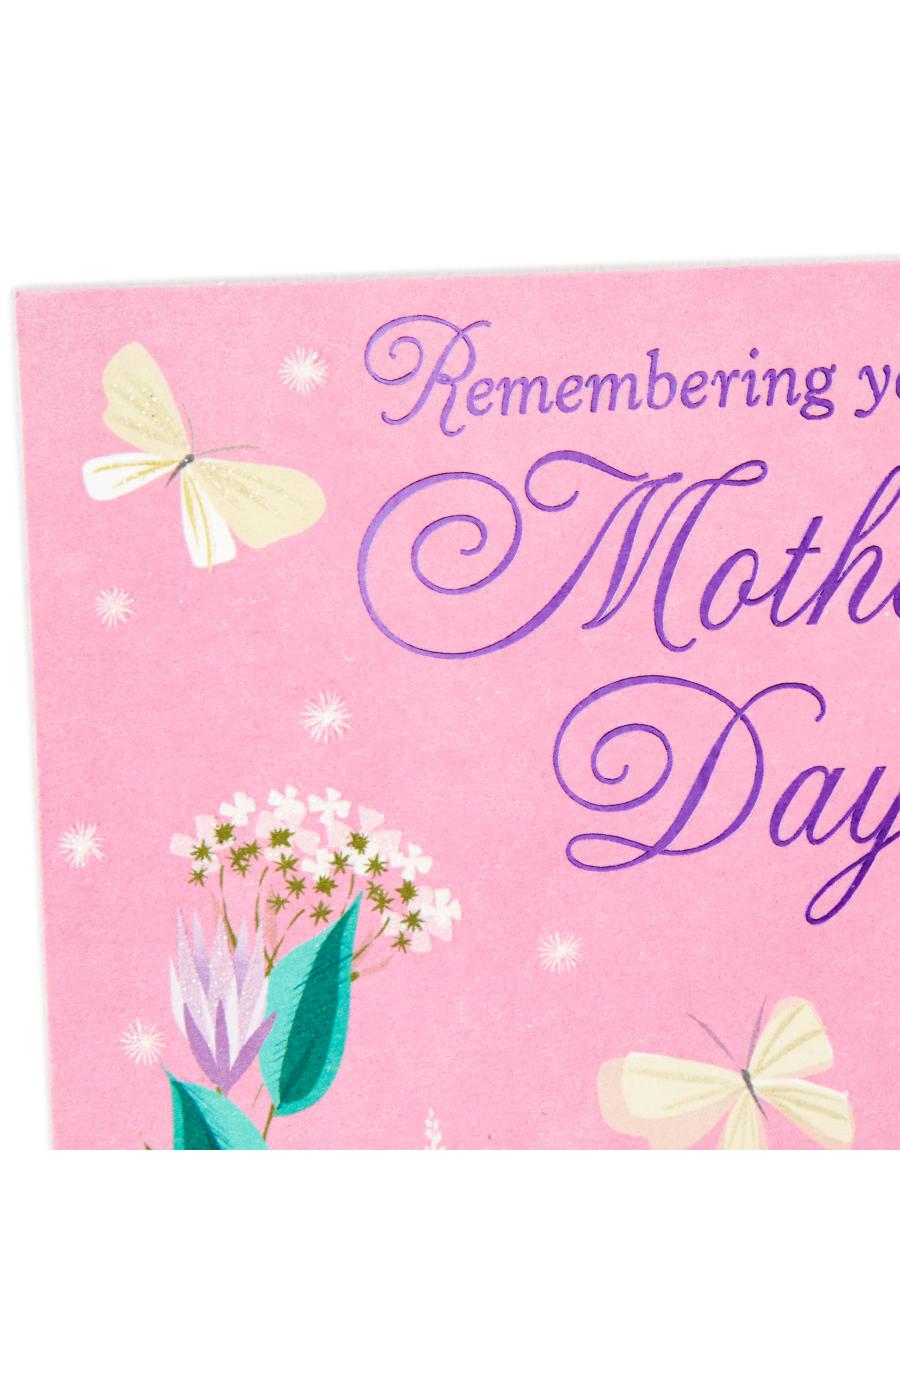 Hallmark Remembering You Assorted Mother's Day Cards with Envelopes - S6, S3; image 3 of 7